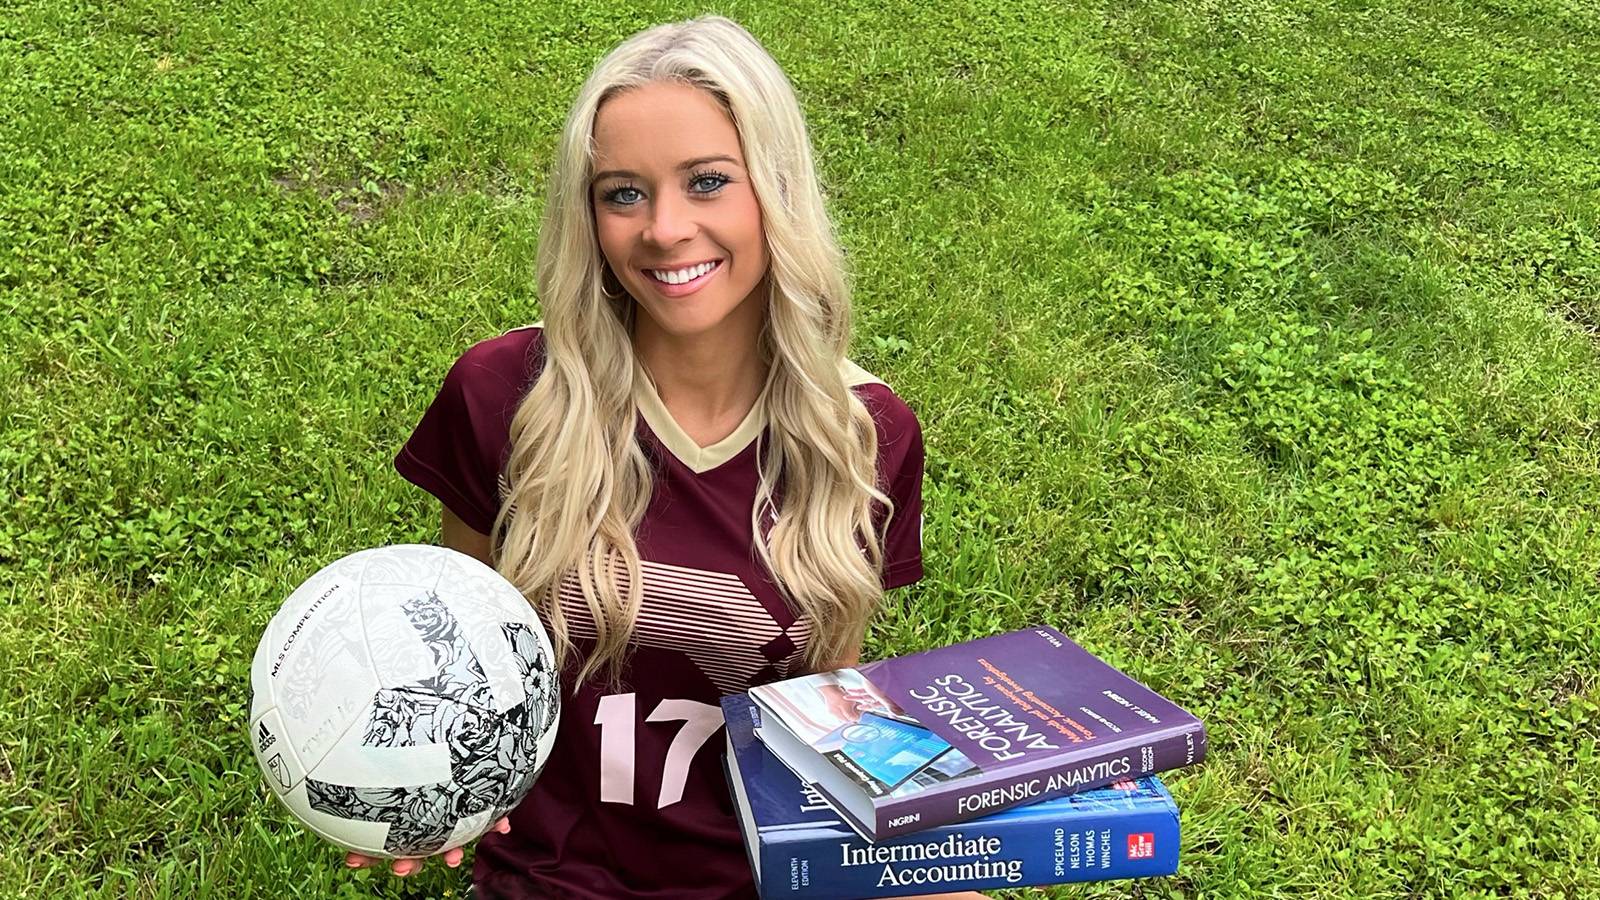 Student soccer player Bailey Peschel holding soccer ball and books